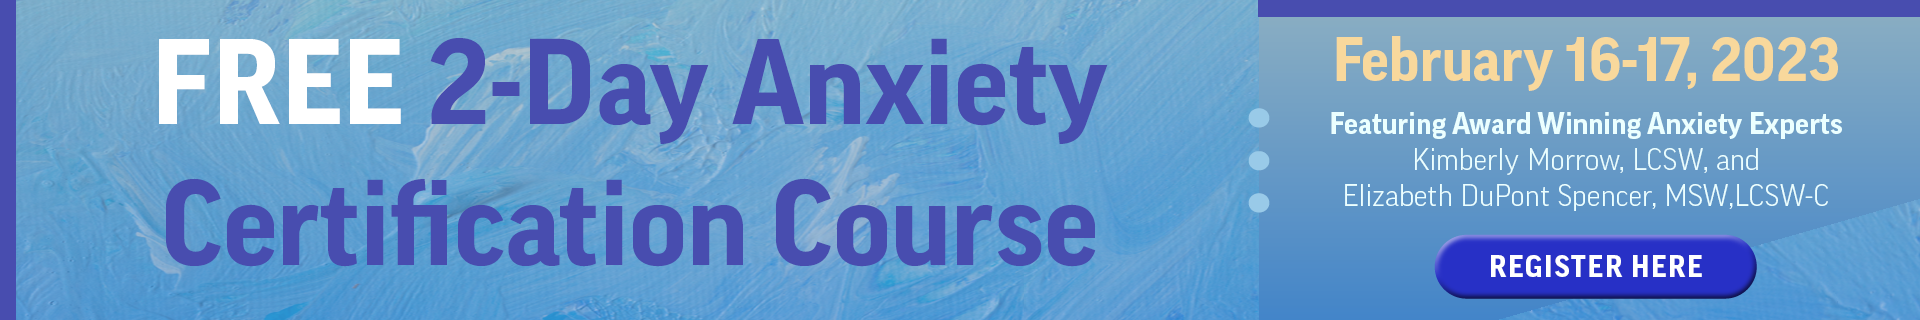 FREE 2-Day Anxiety Certification Course: Integrate CBT and Exposure & Response Prevention for Treatment of GAD, Panic Disorder, OCD, Social Anxiety, & Phobias